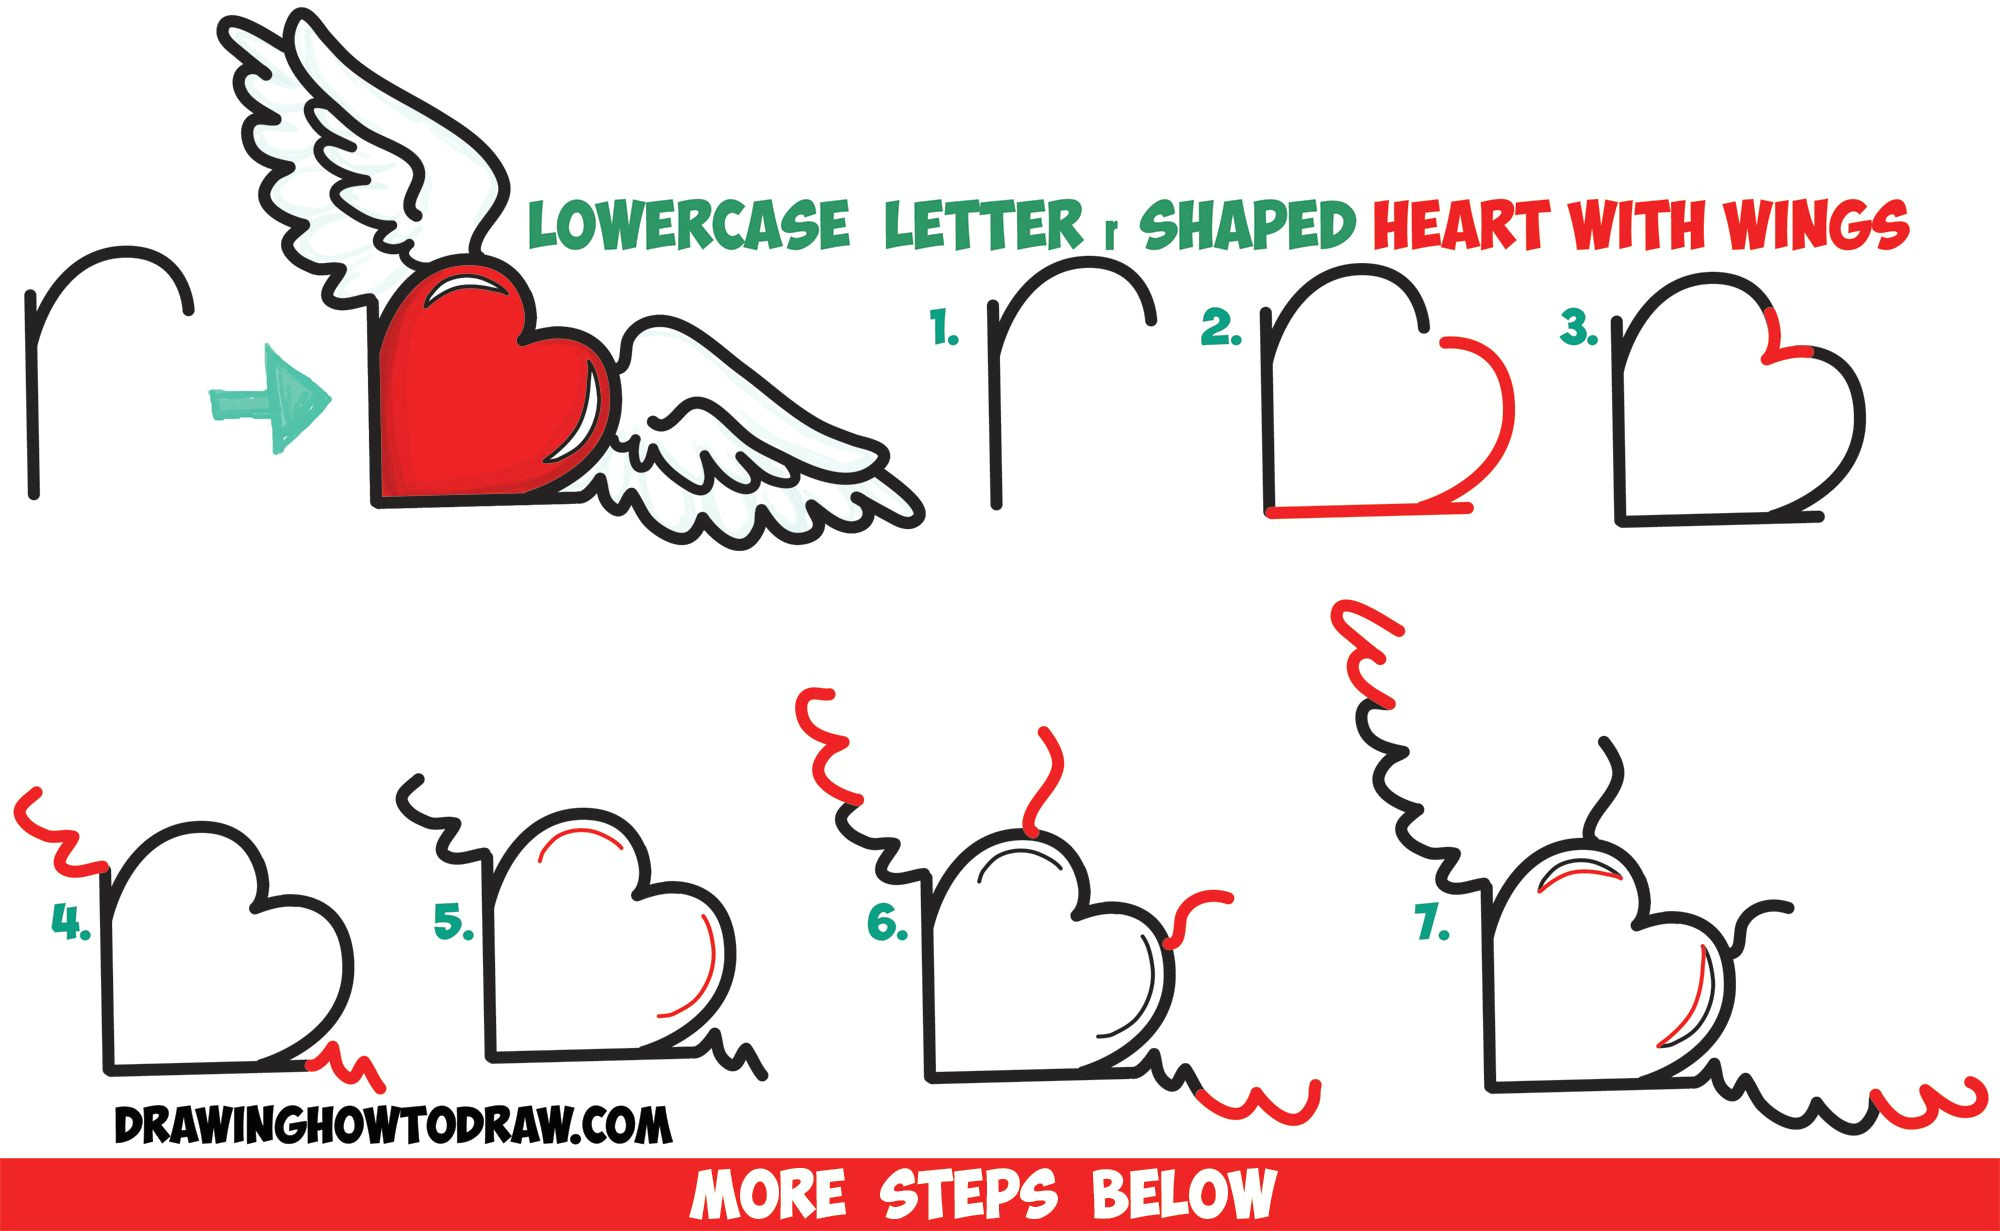 Drawing Of A Heart and Wings How to Draw Heart with Wings From Lowercase Letter R Shapes Easy